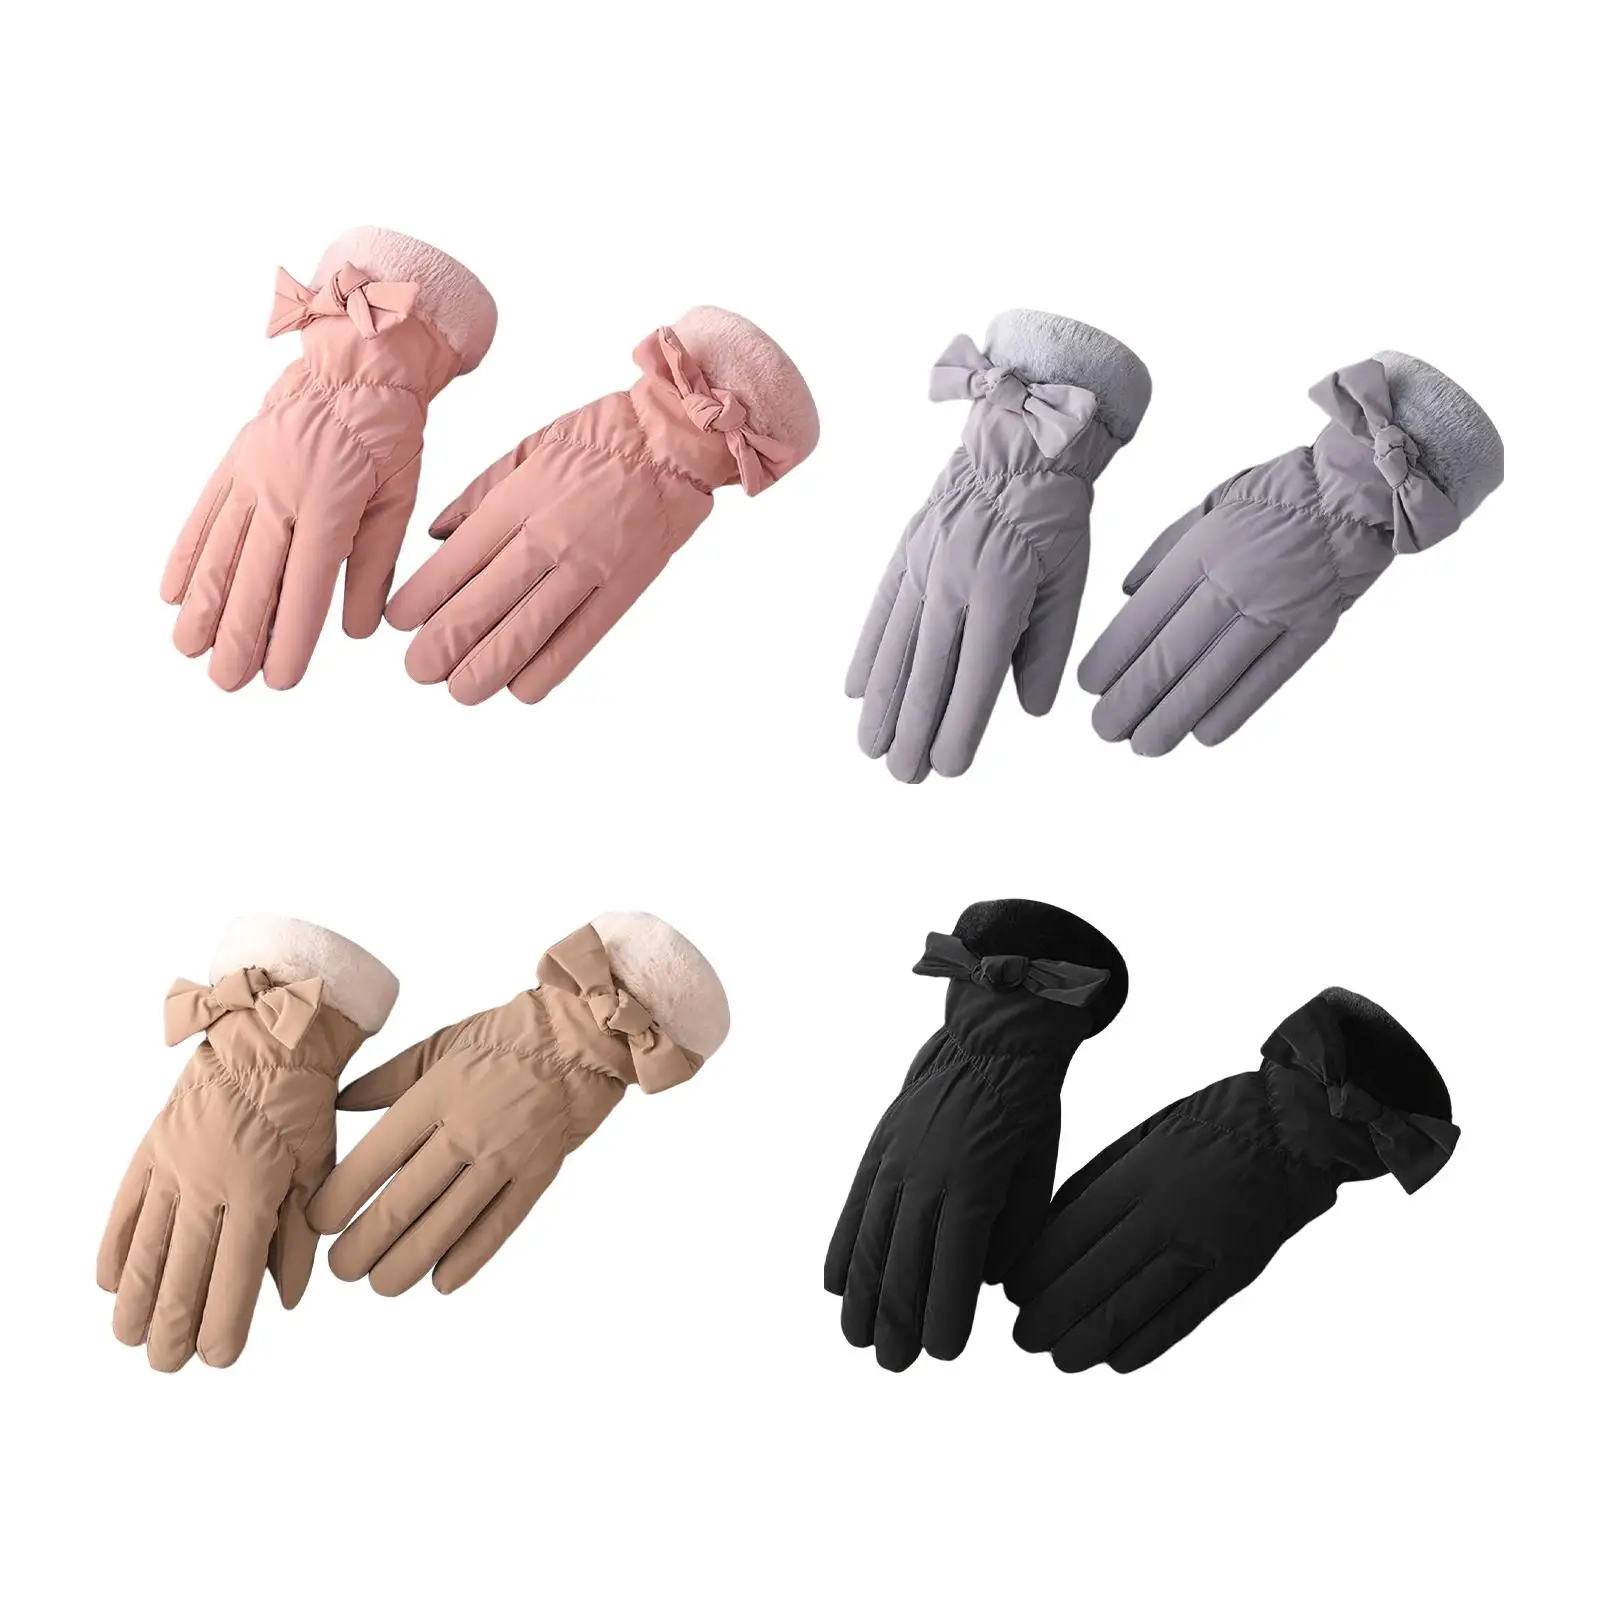 Women Winter Gloves Touch Screen Thermal Gloves Full Finger Warm Texting Gloves for Skiing Outdoor Sports Cycling Hiking